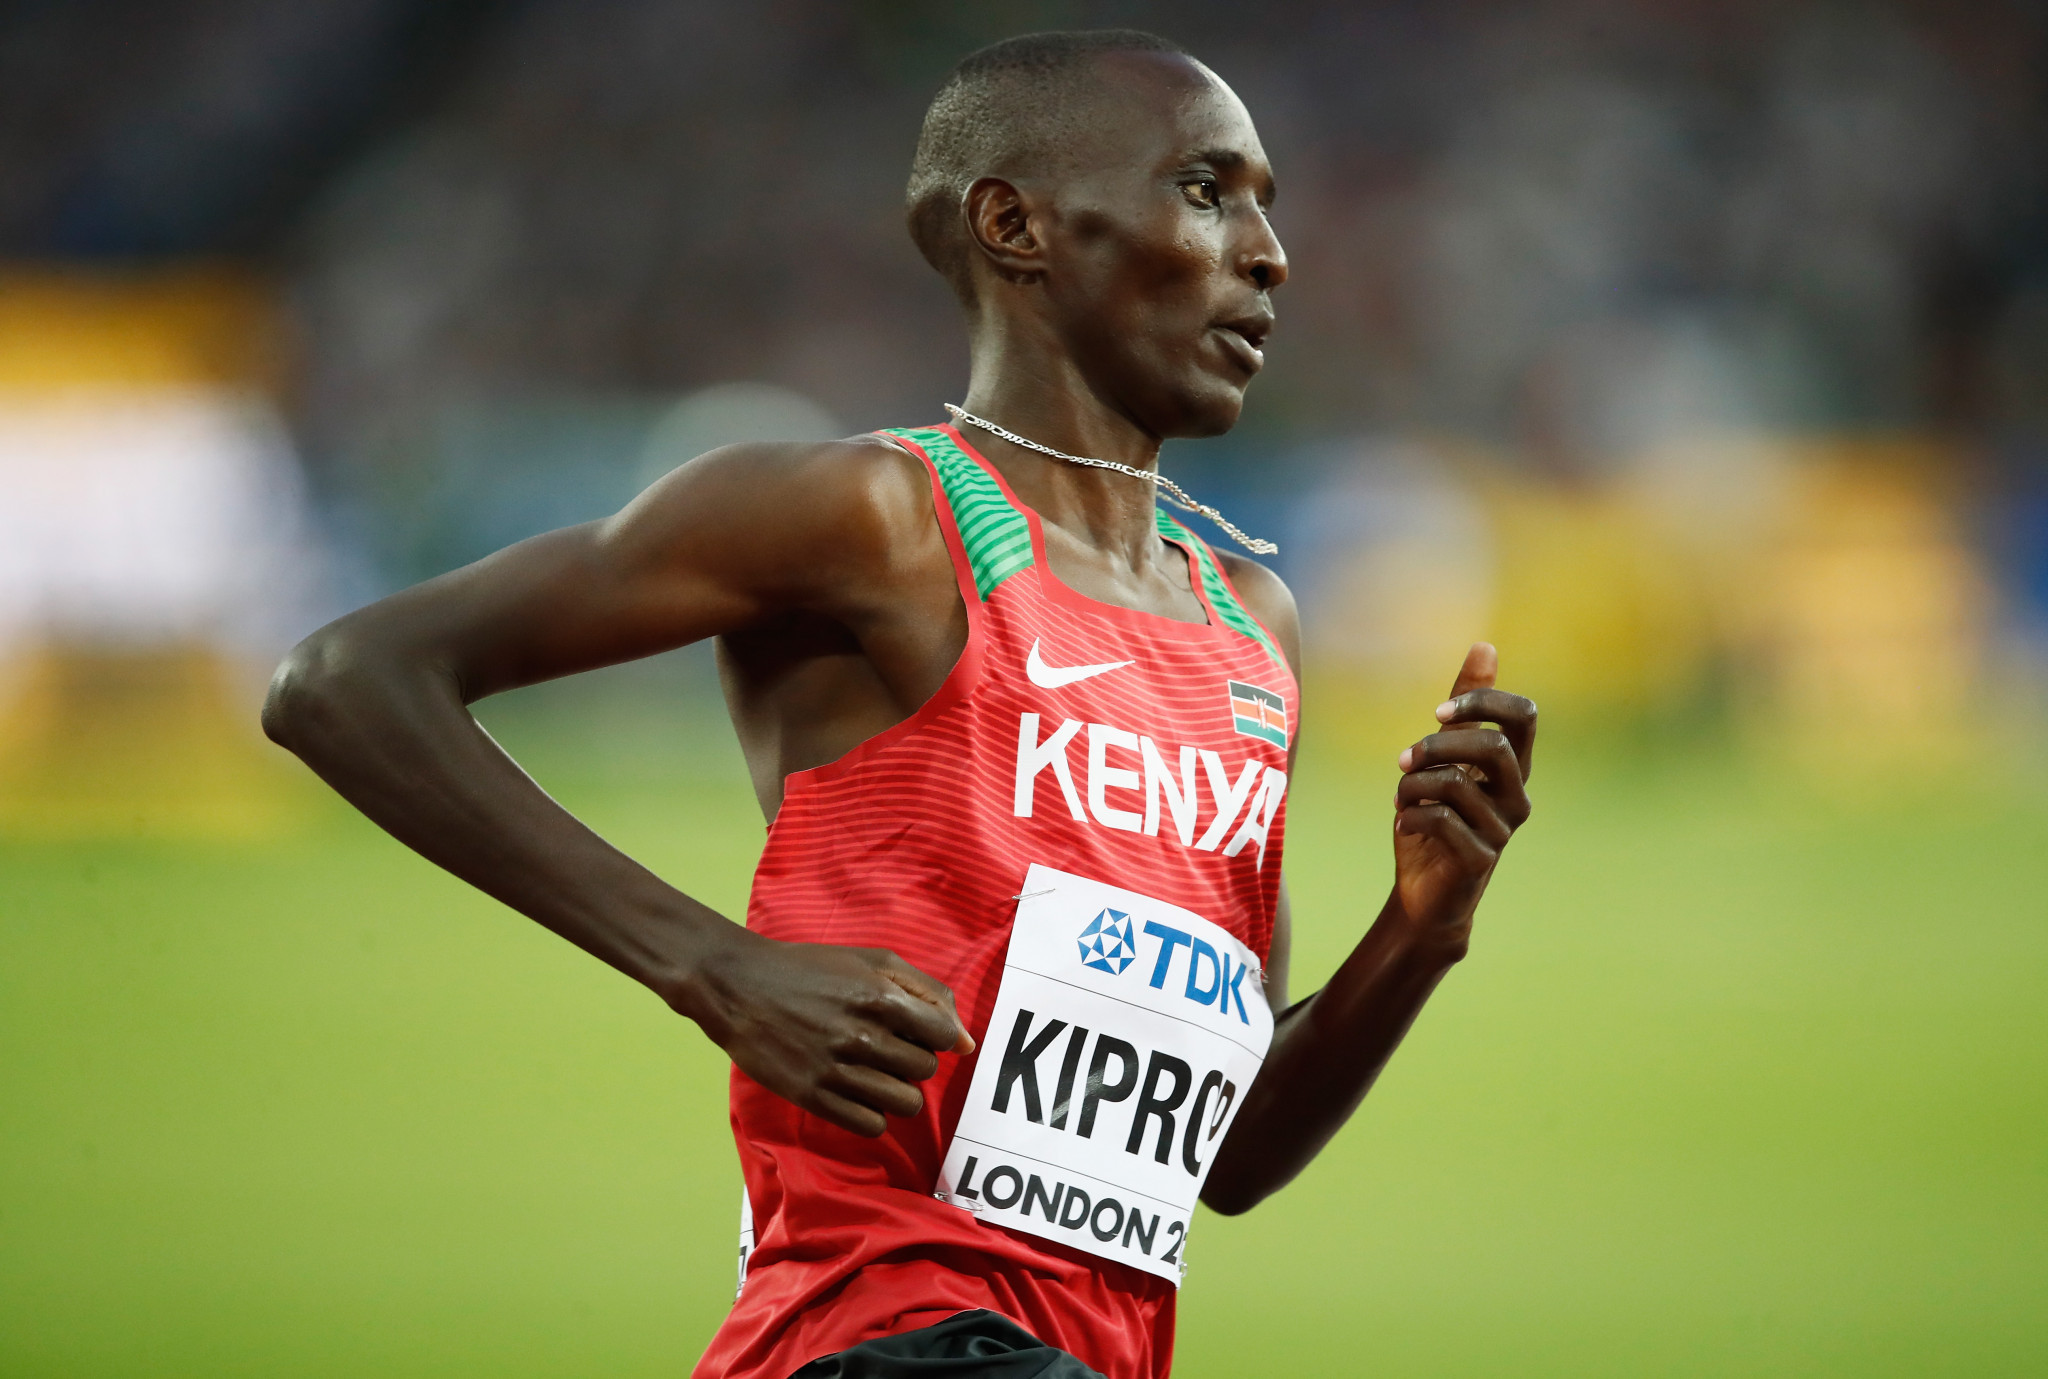 Asbel Kiprop has reportedly been implicated in a doping scandal ©Getty Images